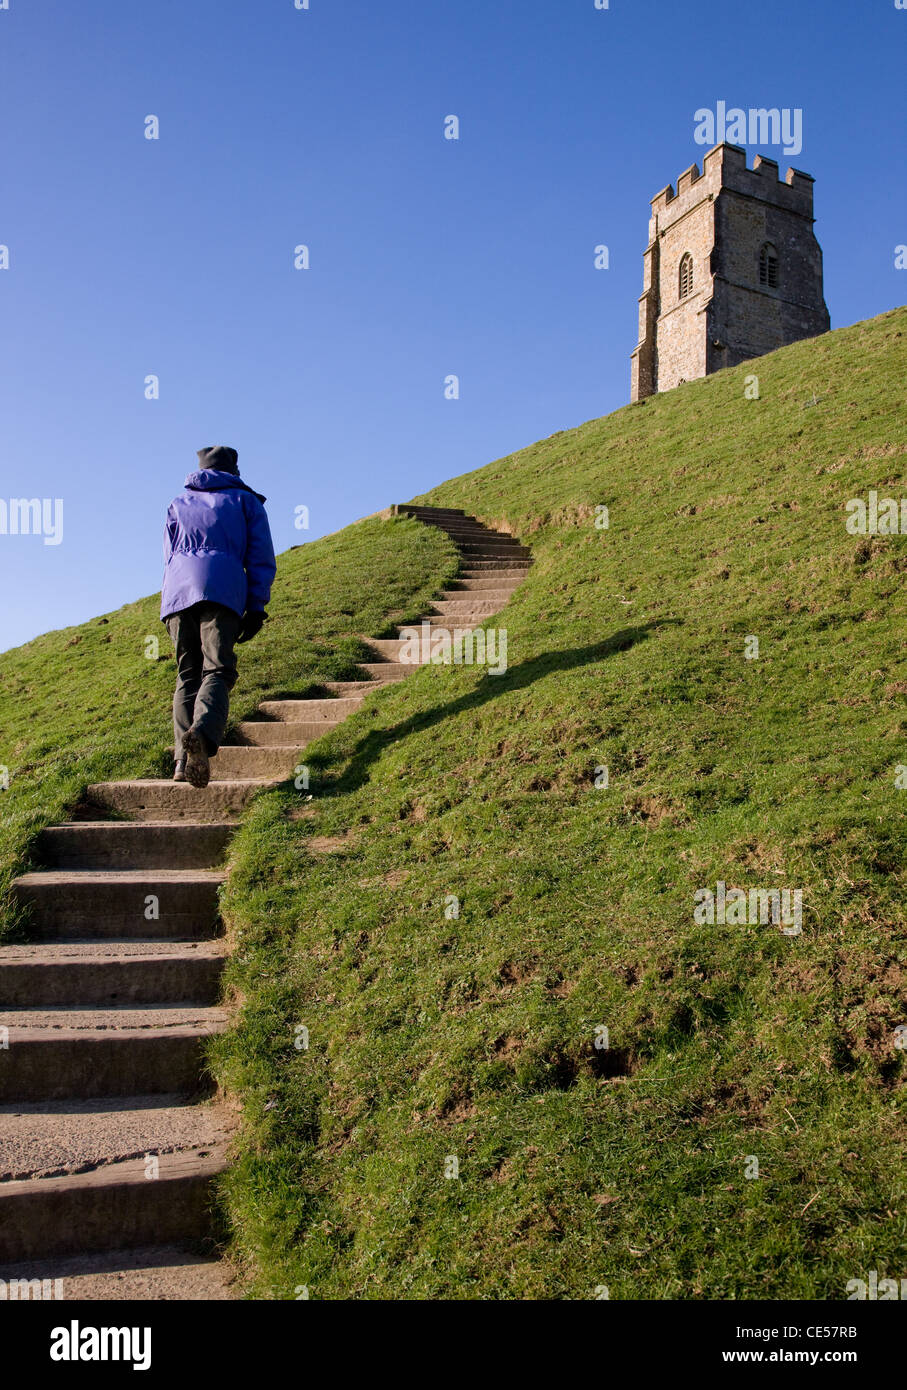 A woman climbs up the steep steps to St Michael's Tower on Glastonbury Tor in Somerset UK Stock Photo